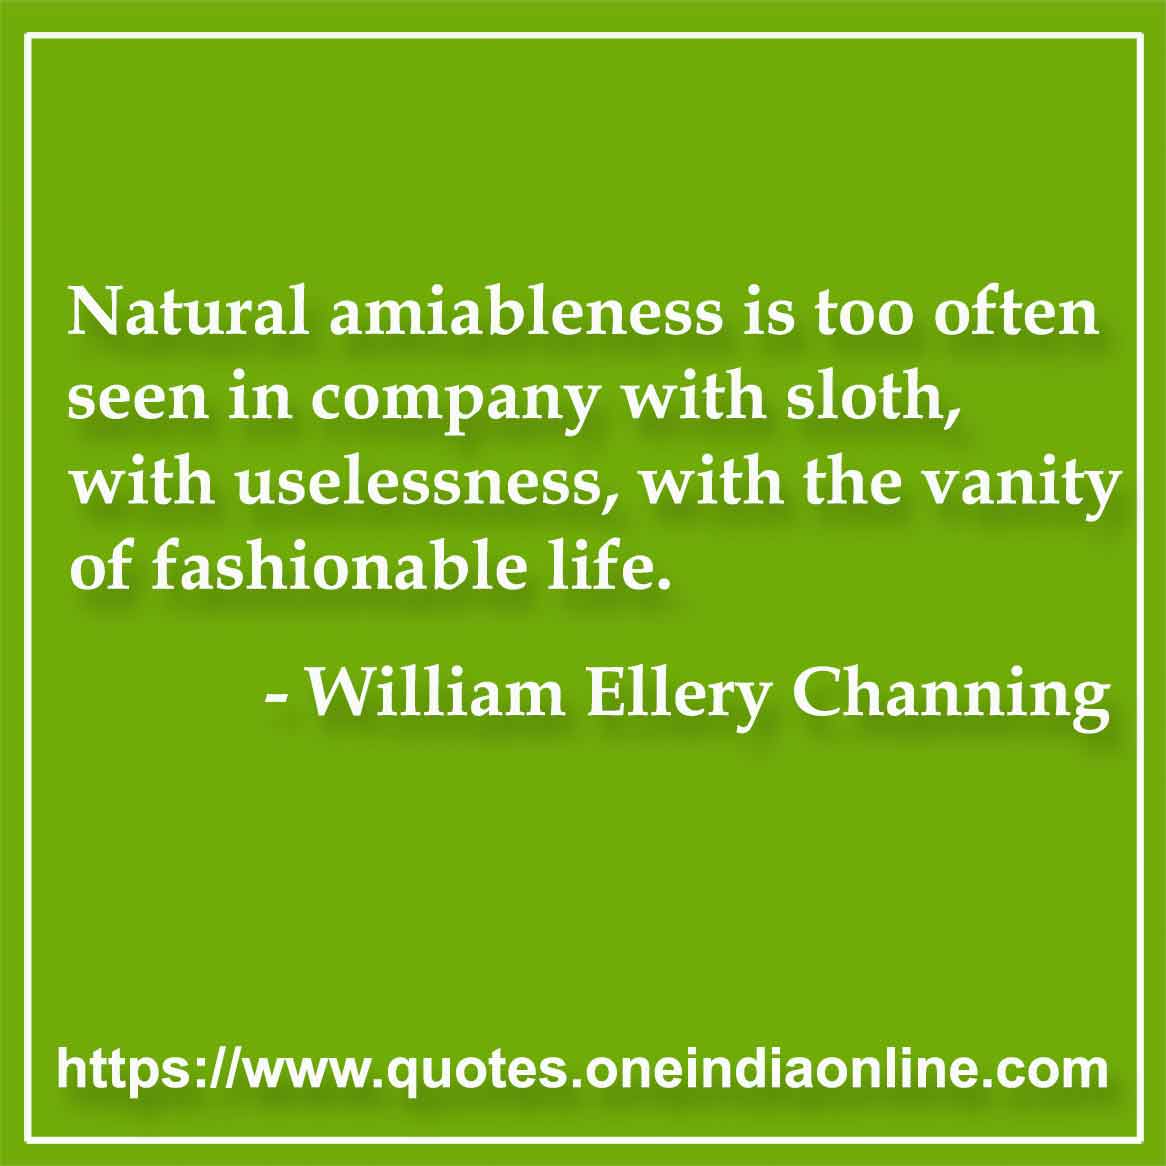 Natural amiableness is too often seen in company with sloth, with uselessness, with the vanity of fashionable life.

-William Ellery Channing Quote